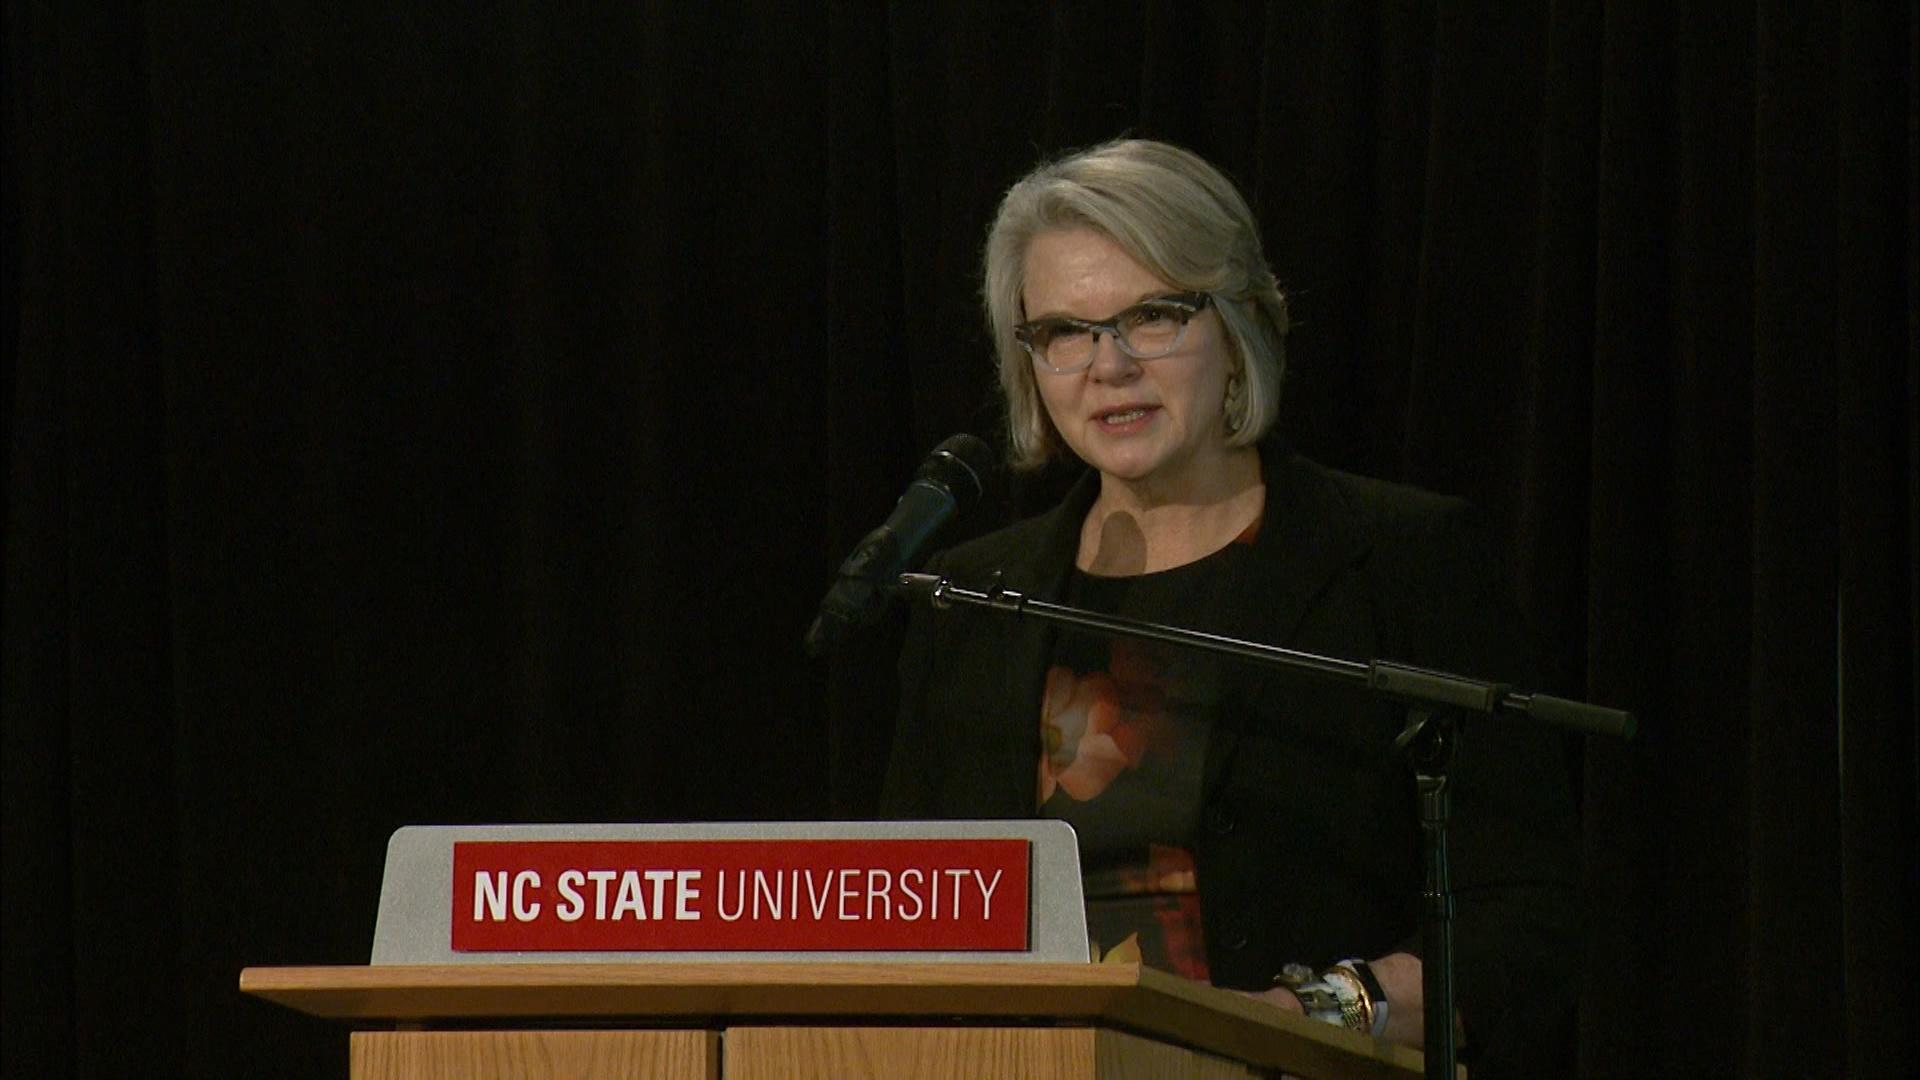 My Future NC: Margaret Spellings Opening Remarks